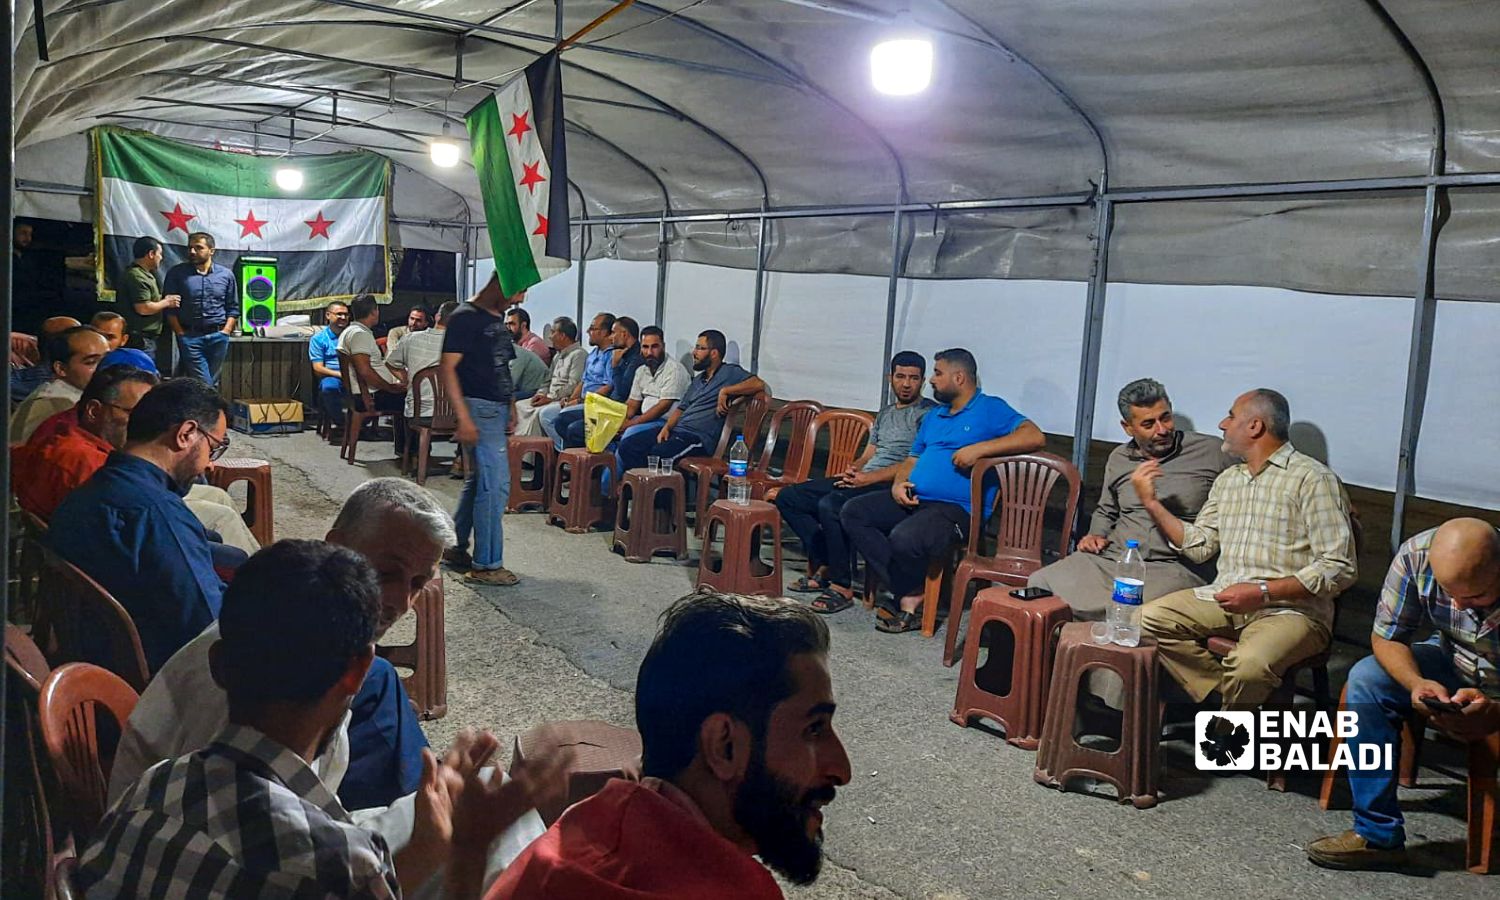 Teachers sit-in in front of the Education Directorate in al-Bab city in the eastern countryside of Aleppo to demand their dues - 3 October 2022 (Enab Baladi)